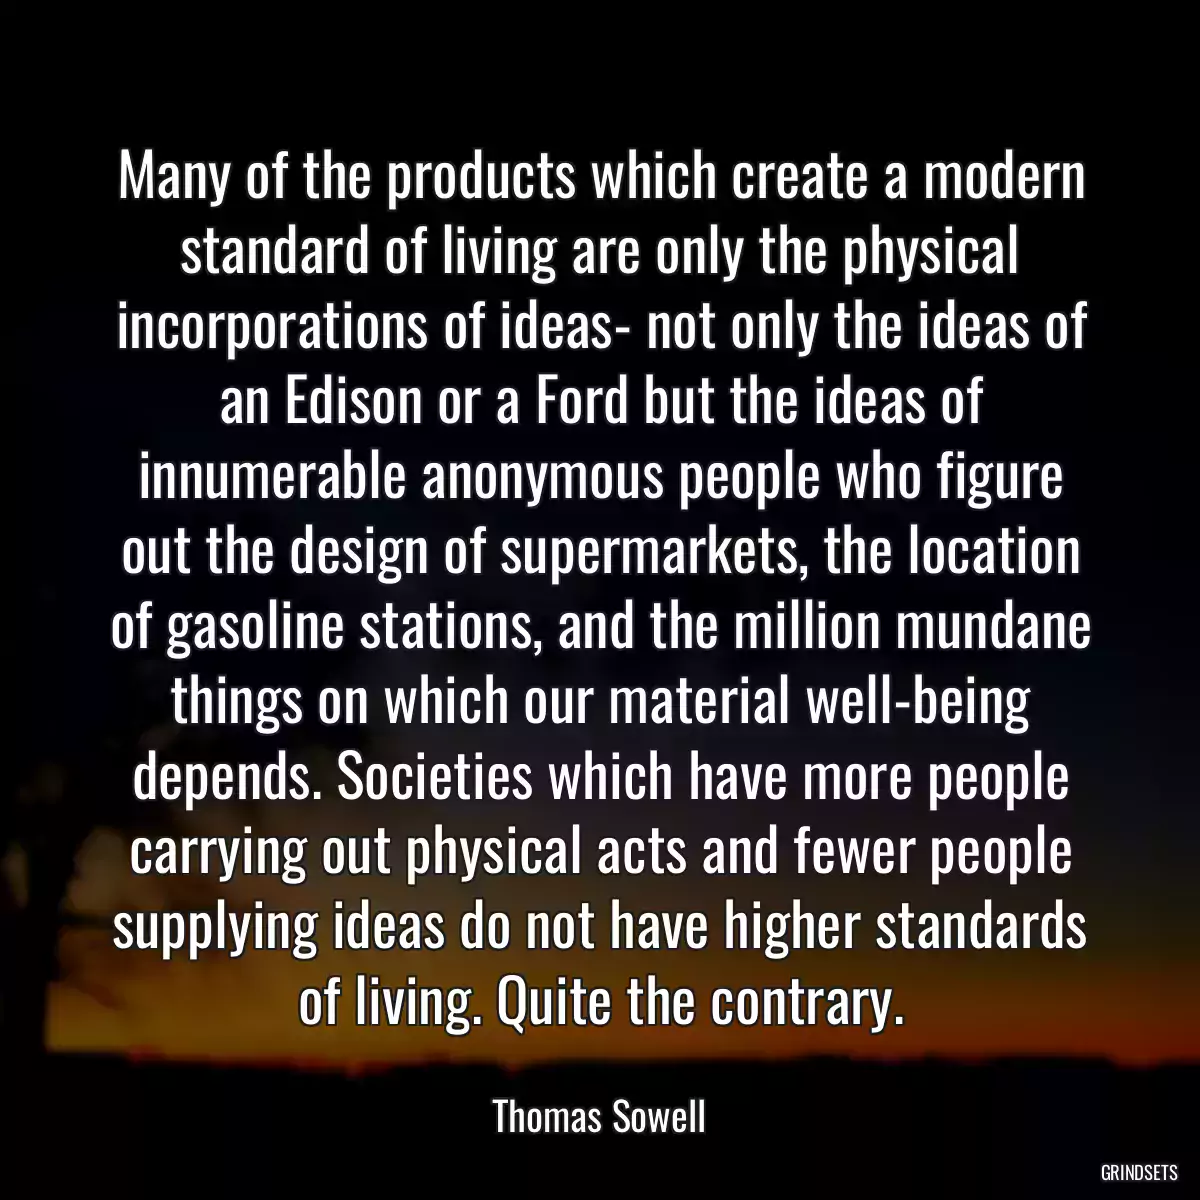 Many of the products which create a modern standard of living are only the physical incorporations of ideas- not only the ideas of an Edison or a Ford but the ideas of innumerable anonymous people who figure out the design of supermarkets, the location of gasoline stations, and the million mundane things on which our material well-being depends. Societies which have more people carrying out physical acts and fewer people supplying ideas do not have higher standards of living. Quite the contrary.